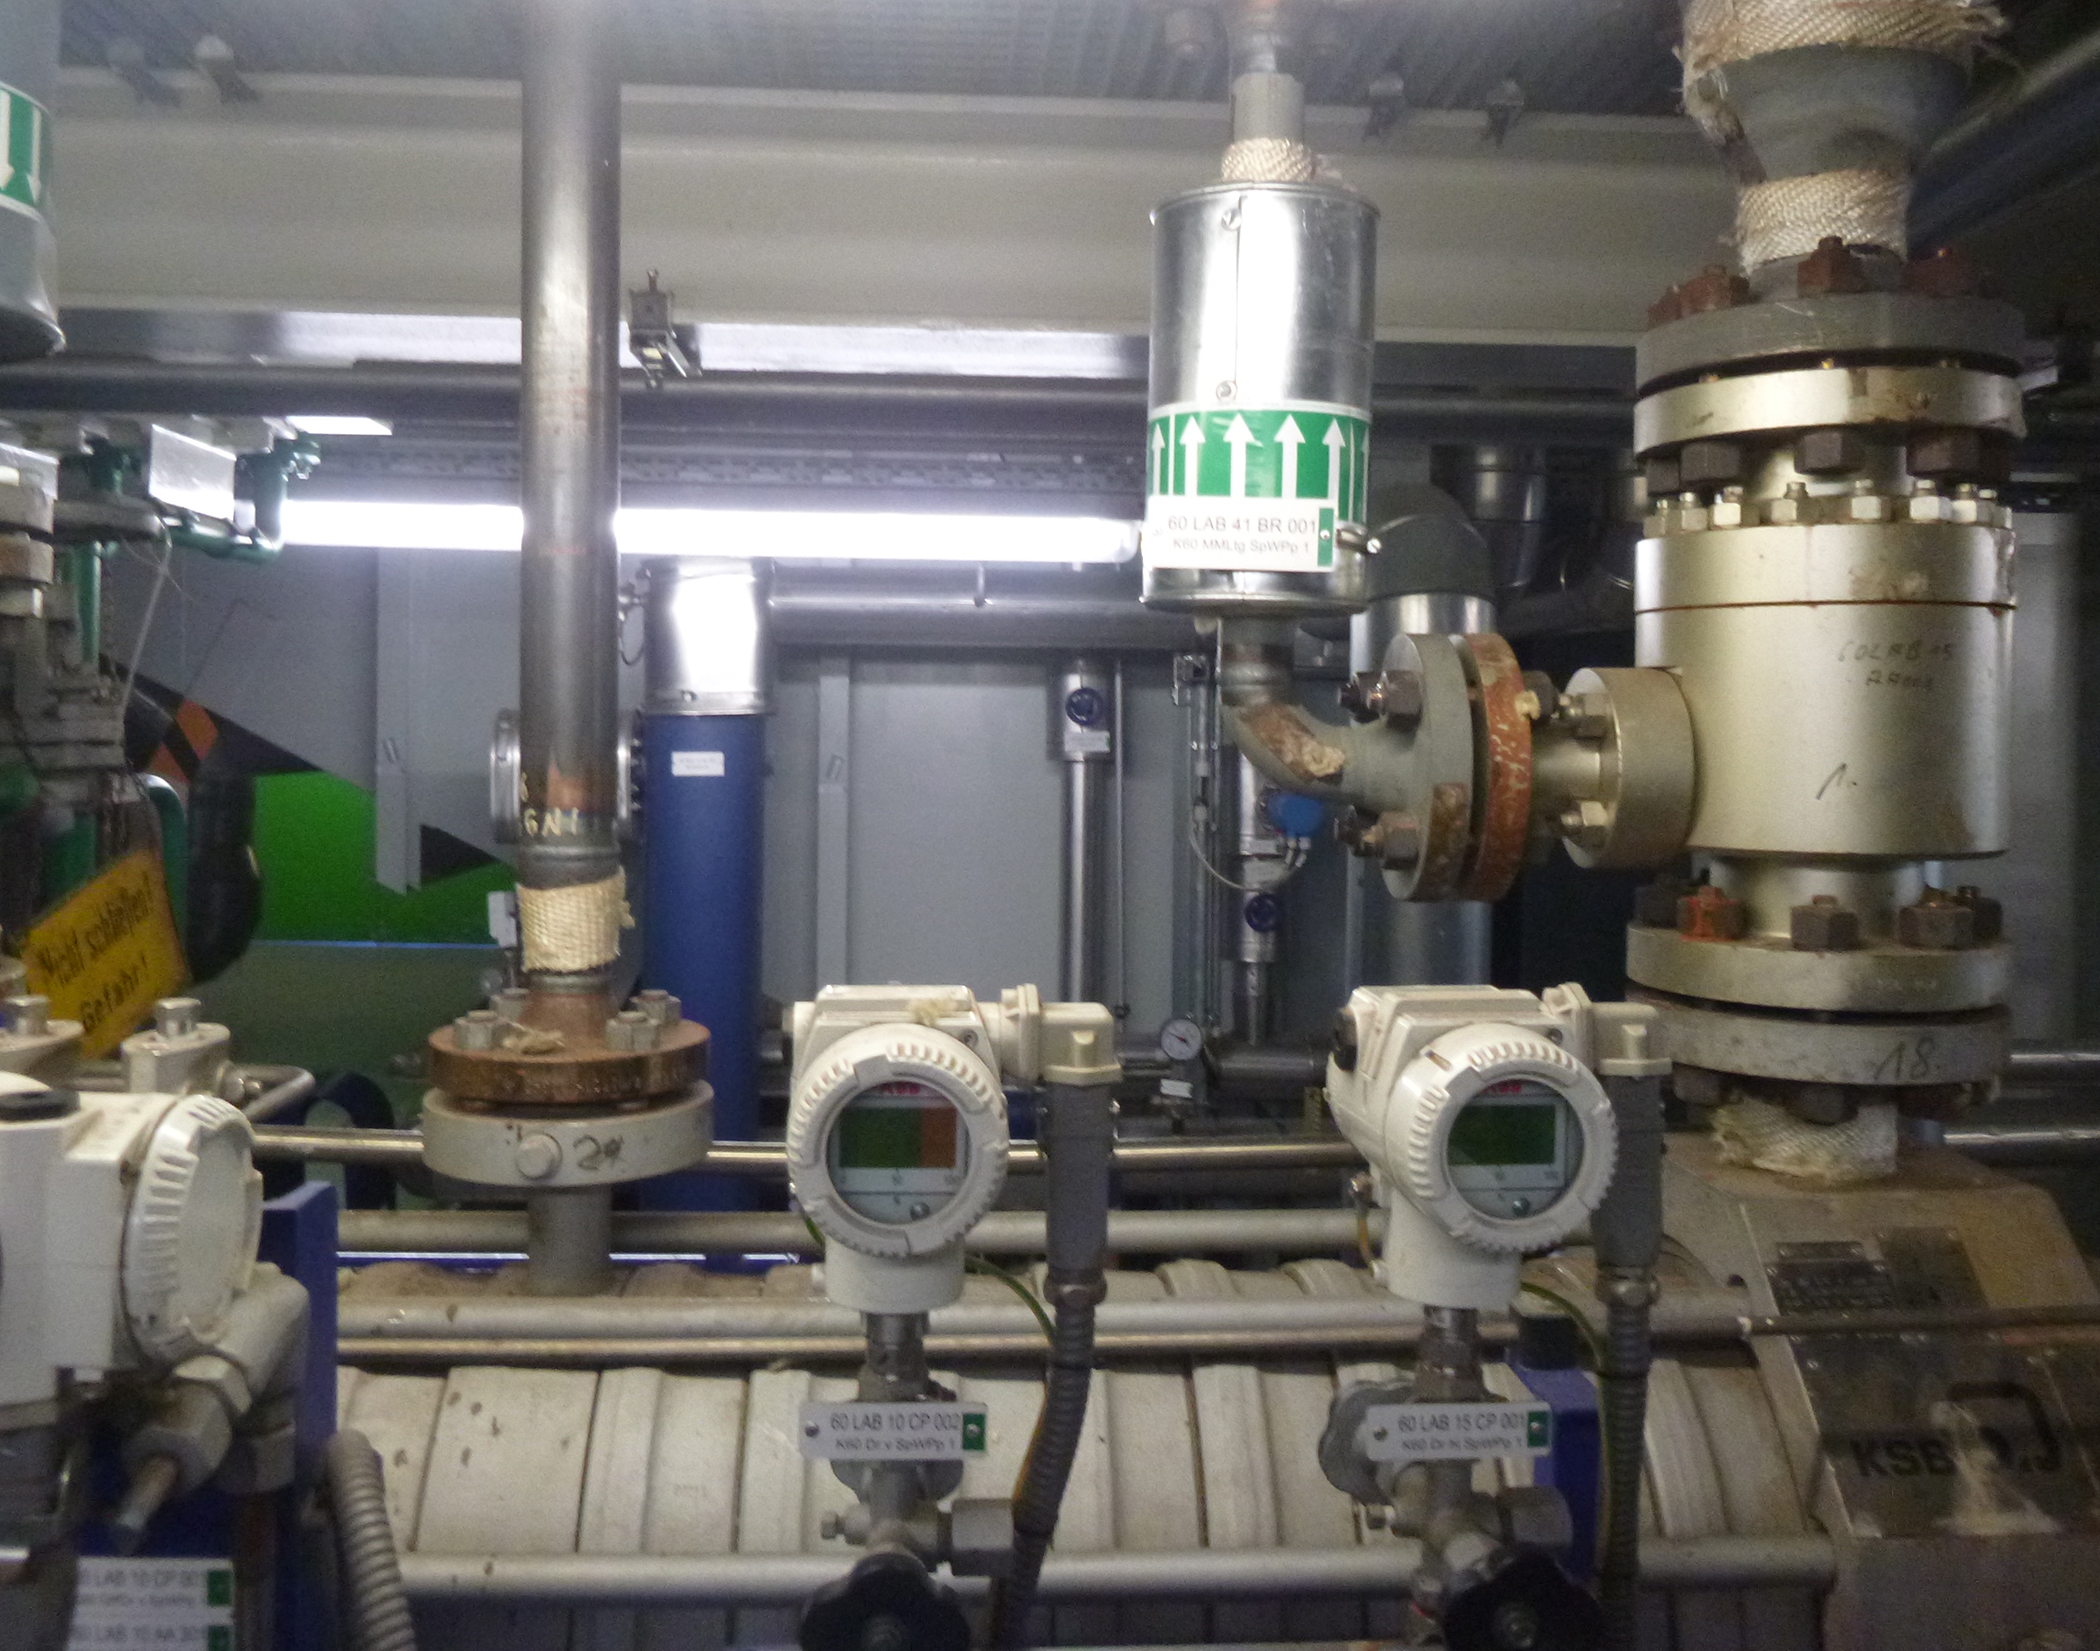 The boiler feed pump was disconnected and removed by Sulzer